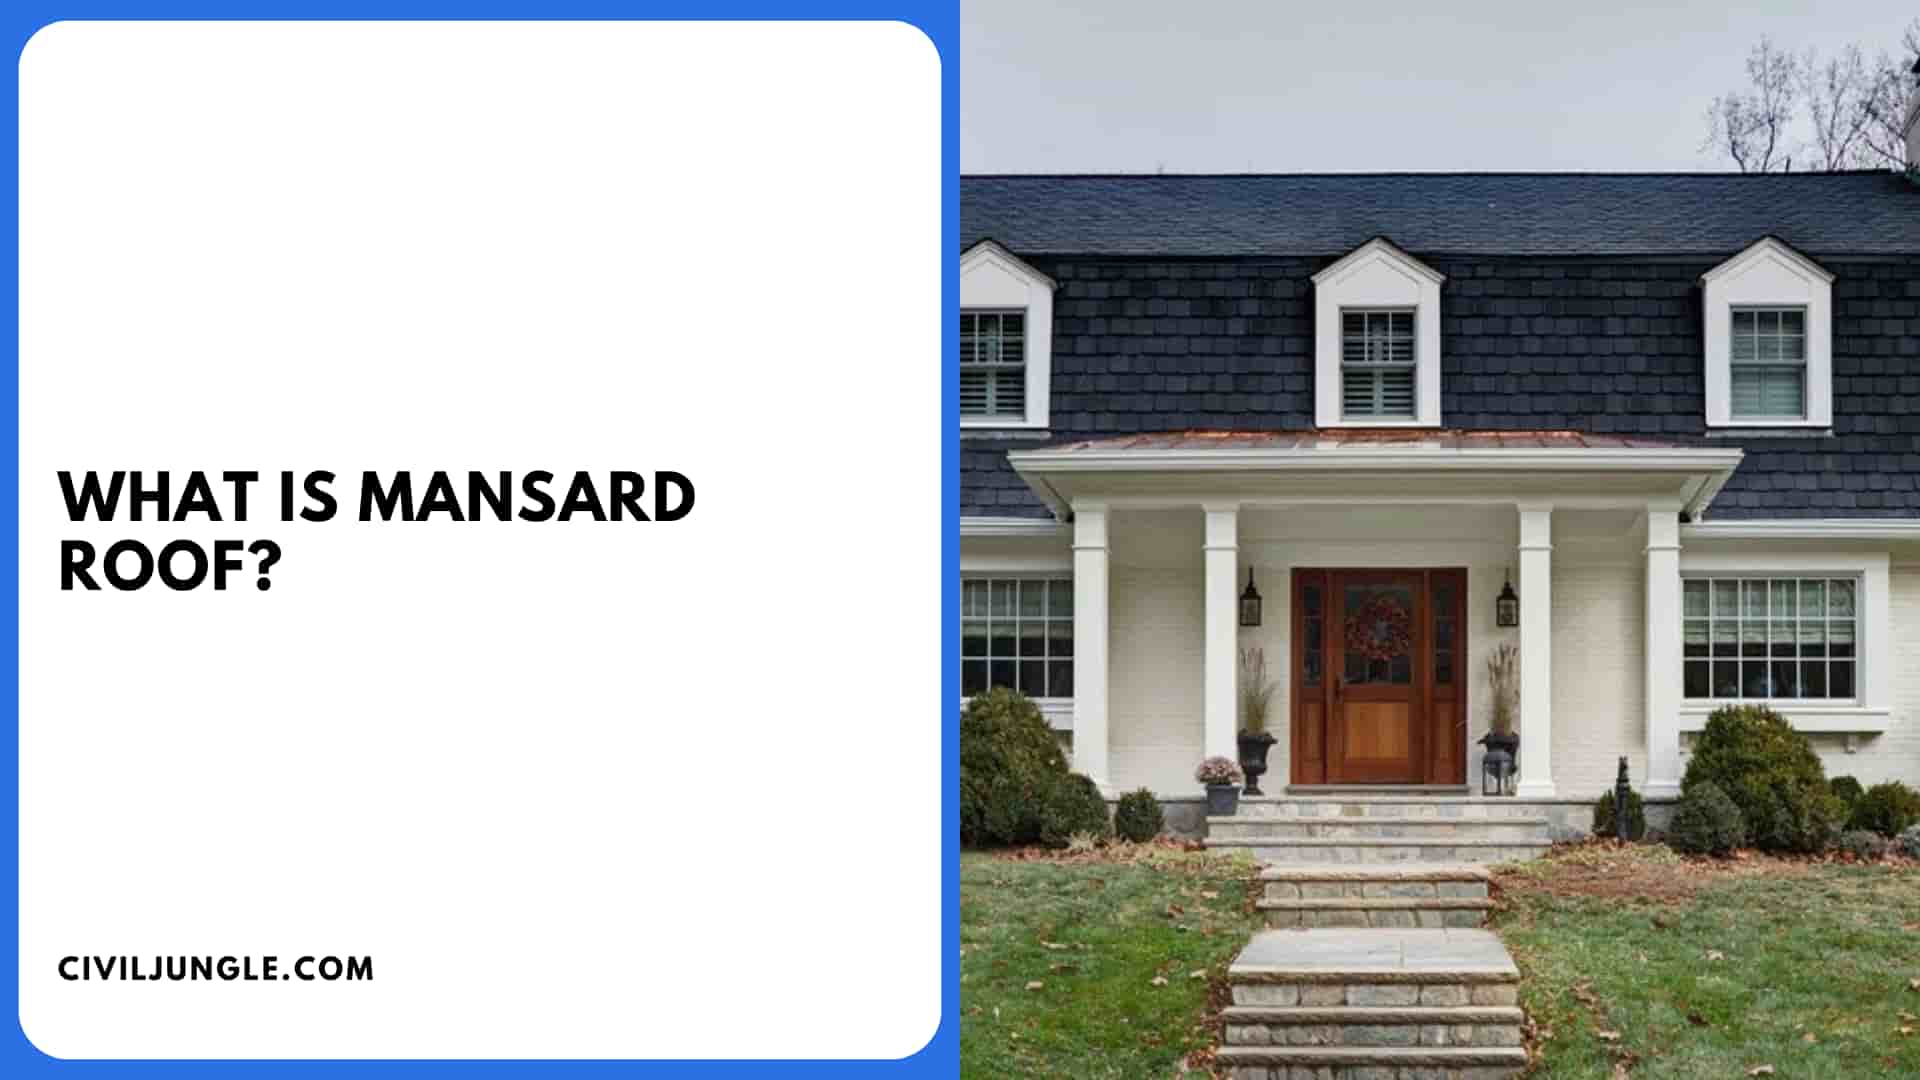 What Is Mansard Roof?